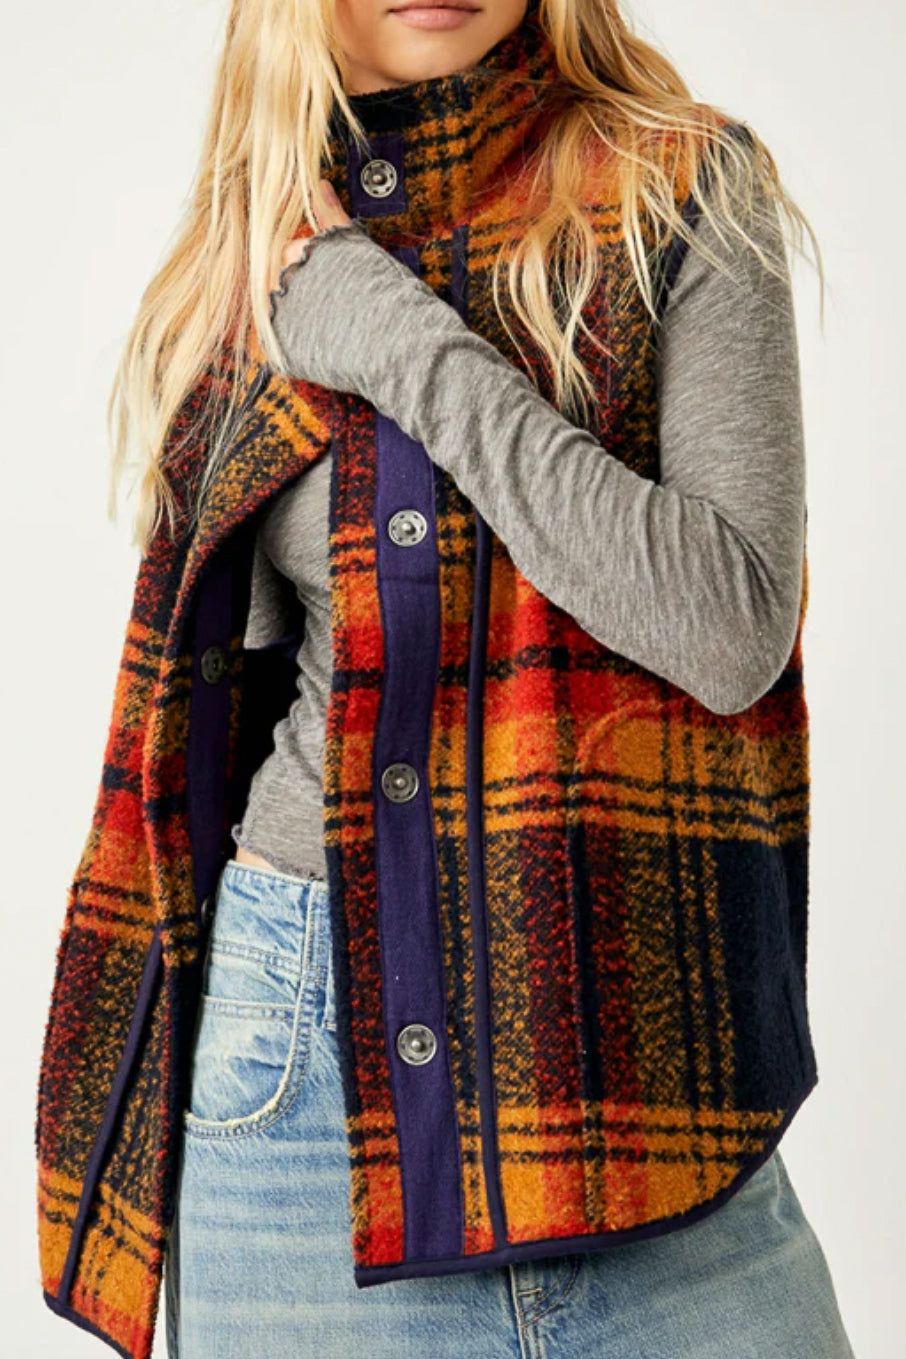 Wrapped Up Blanket Vest - The Canyon